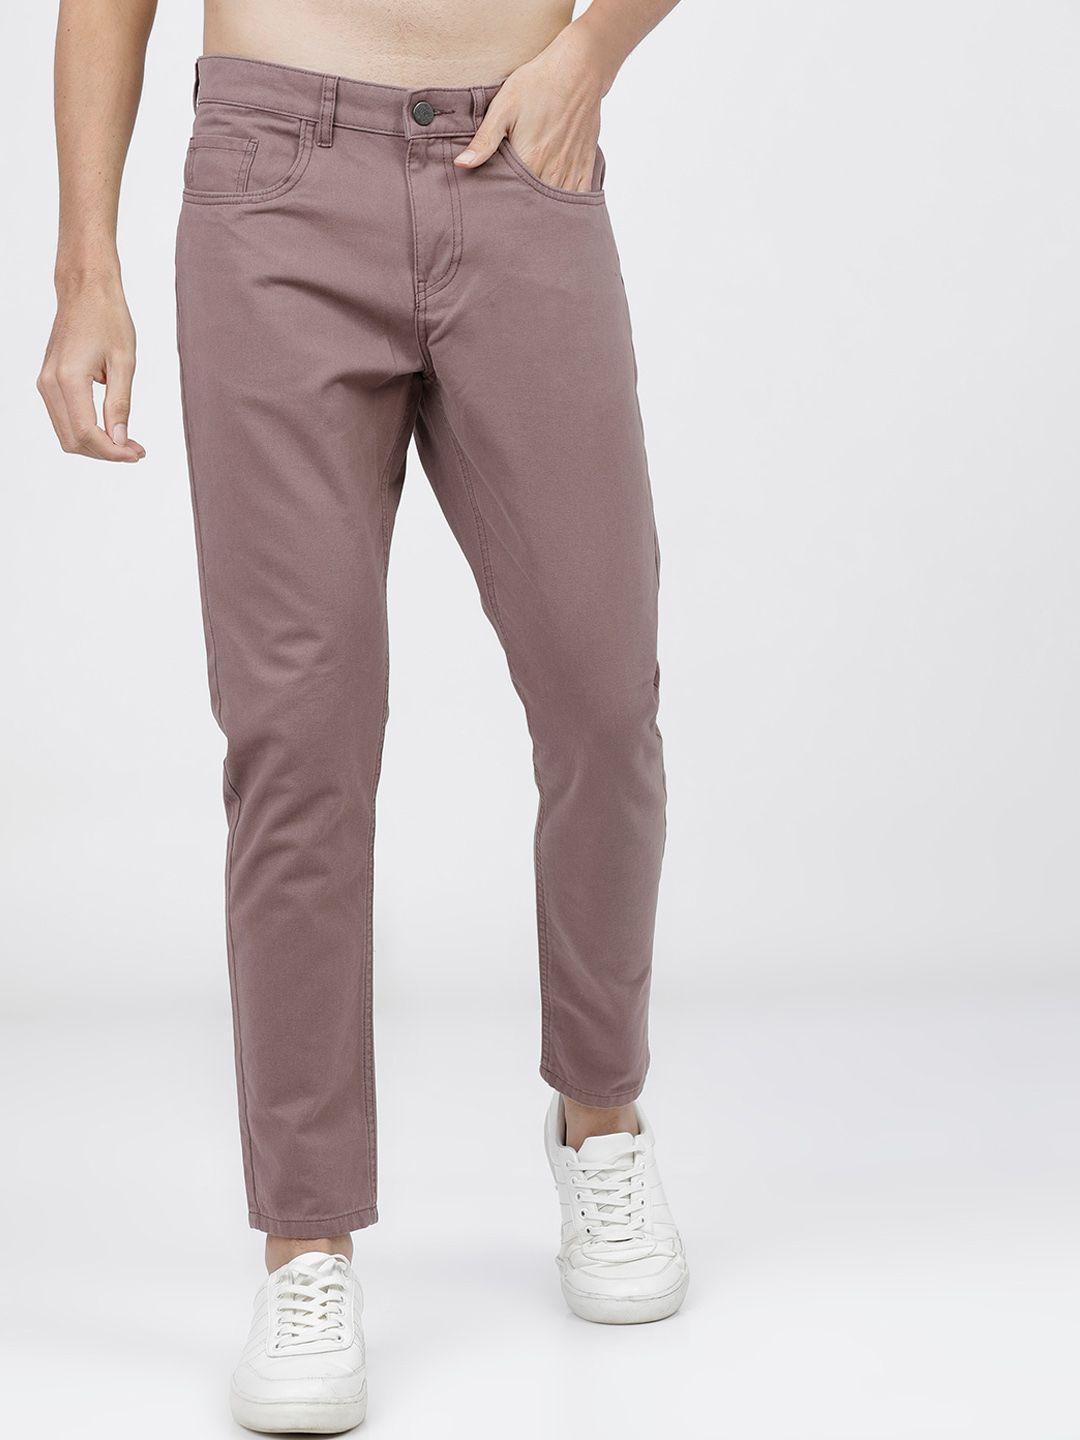 ketch-men-rose-tapered-fit-chinos-trousers